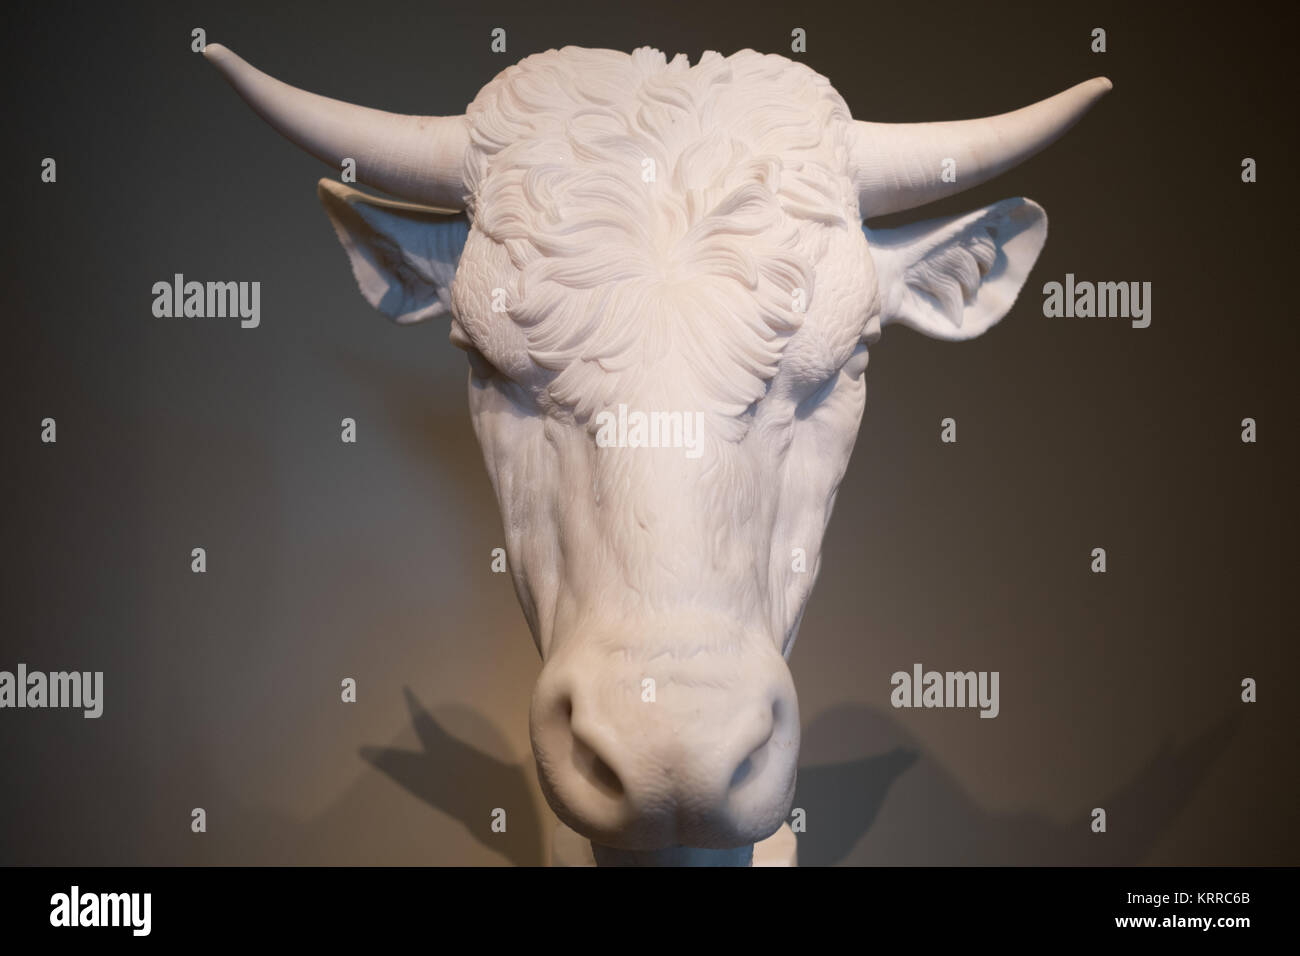 A sculpture of a bull's head on display at the National Gallery of Art in Washington DC. Stock Photo